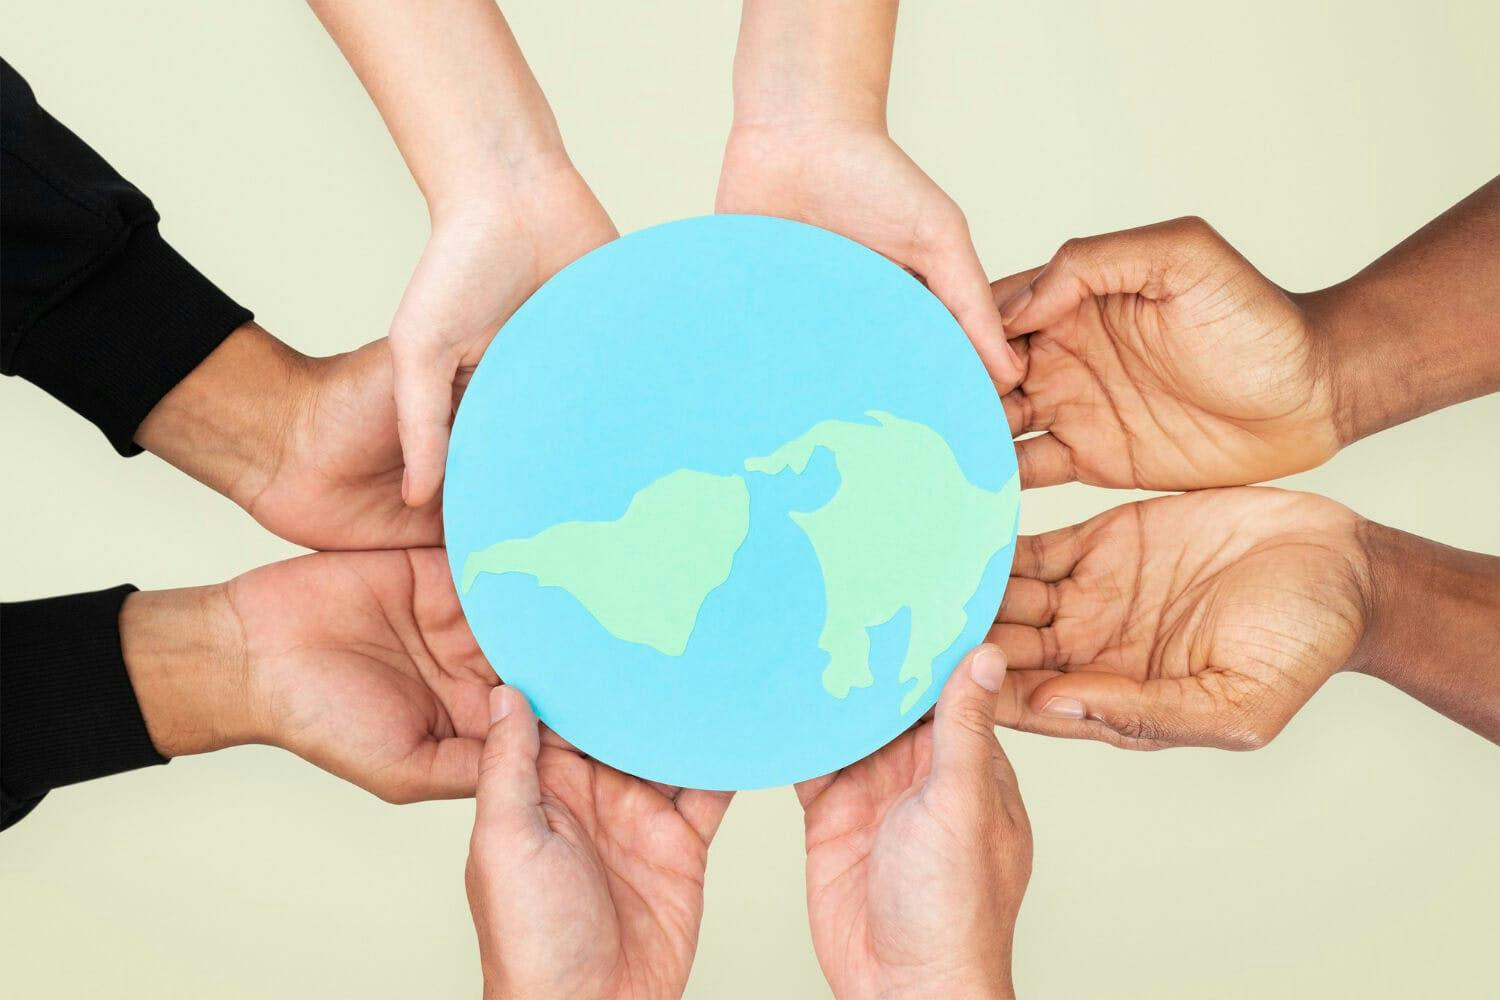 ScreenCloud Article - What is corporate social responsibility?